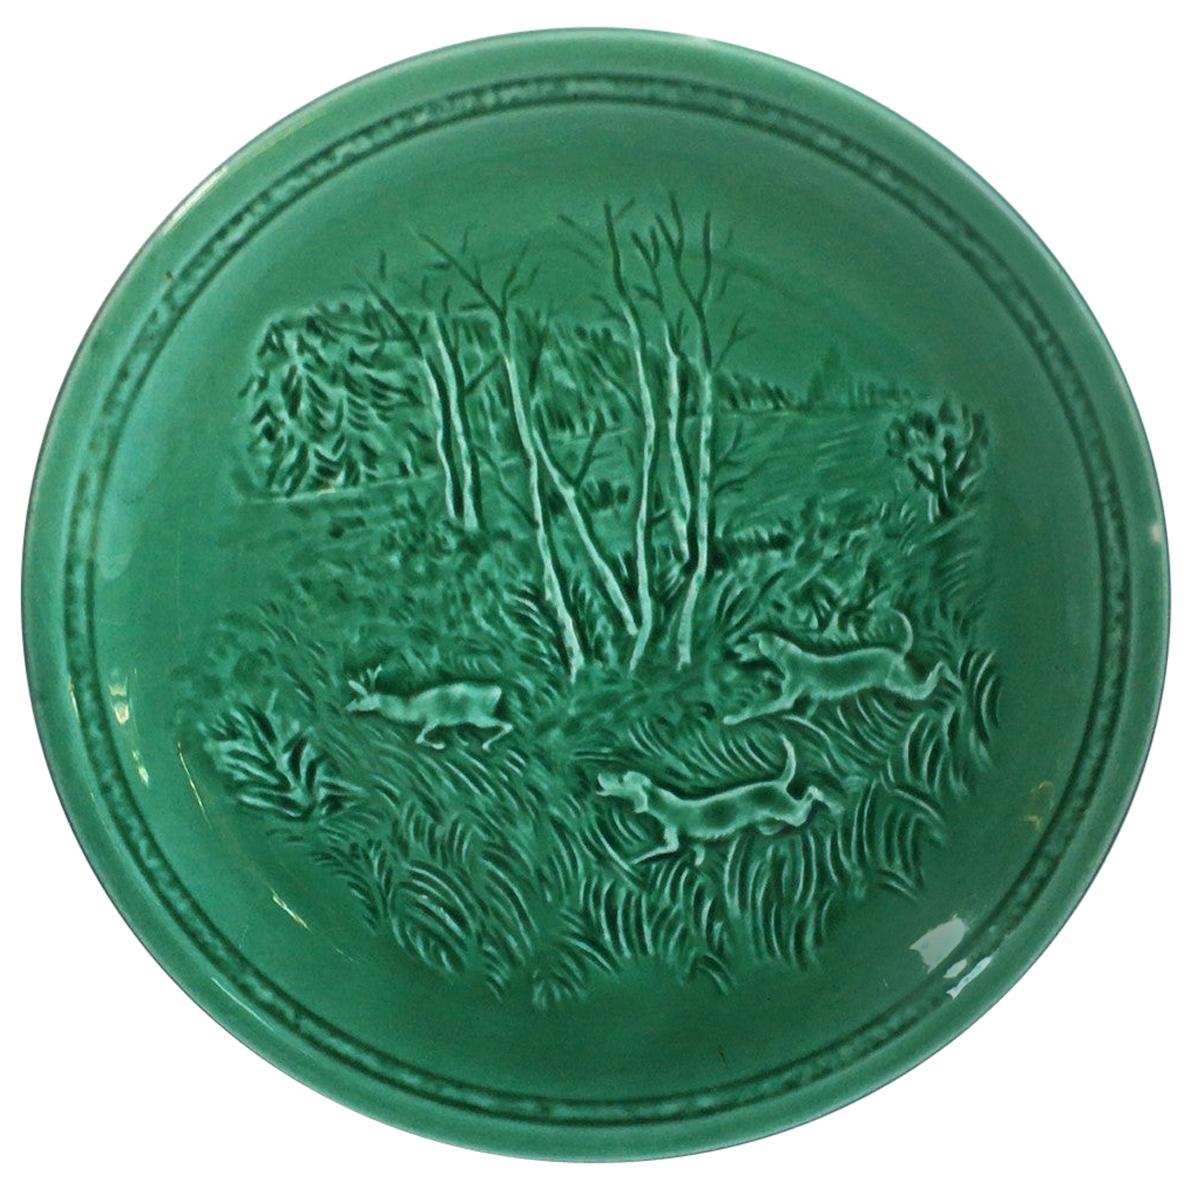 French green Majolica deer and hunting dog plate signed Sarreguemines, circa 1920.
